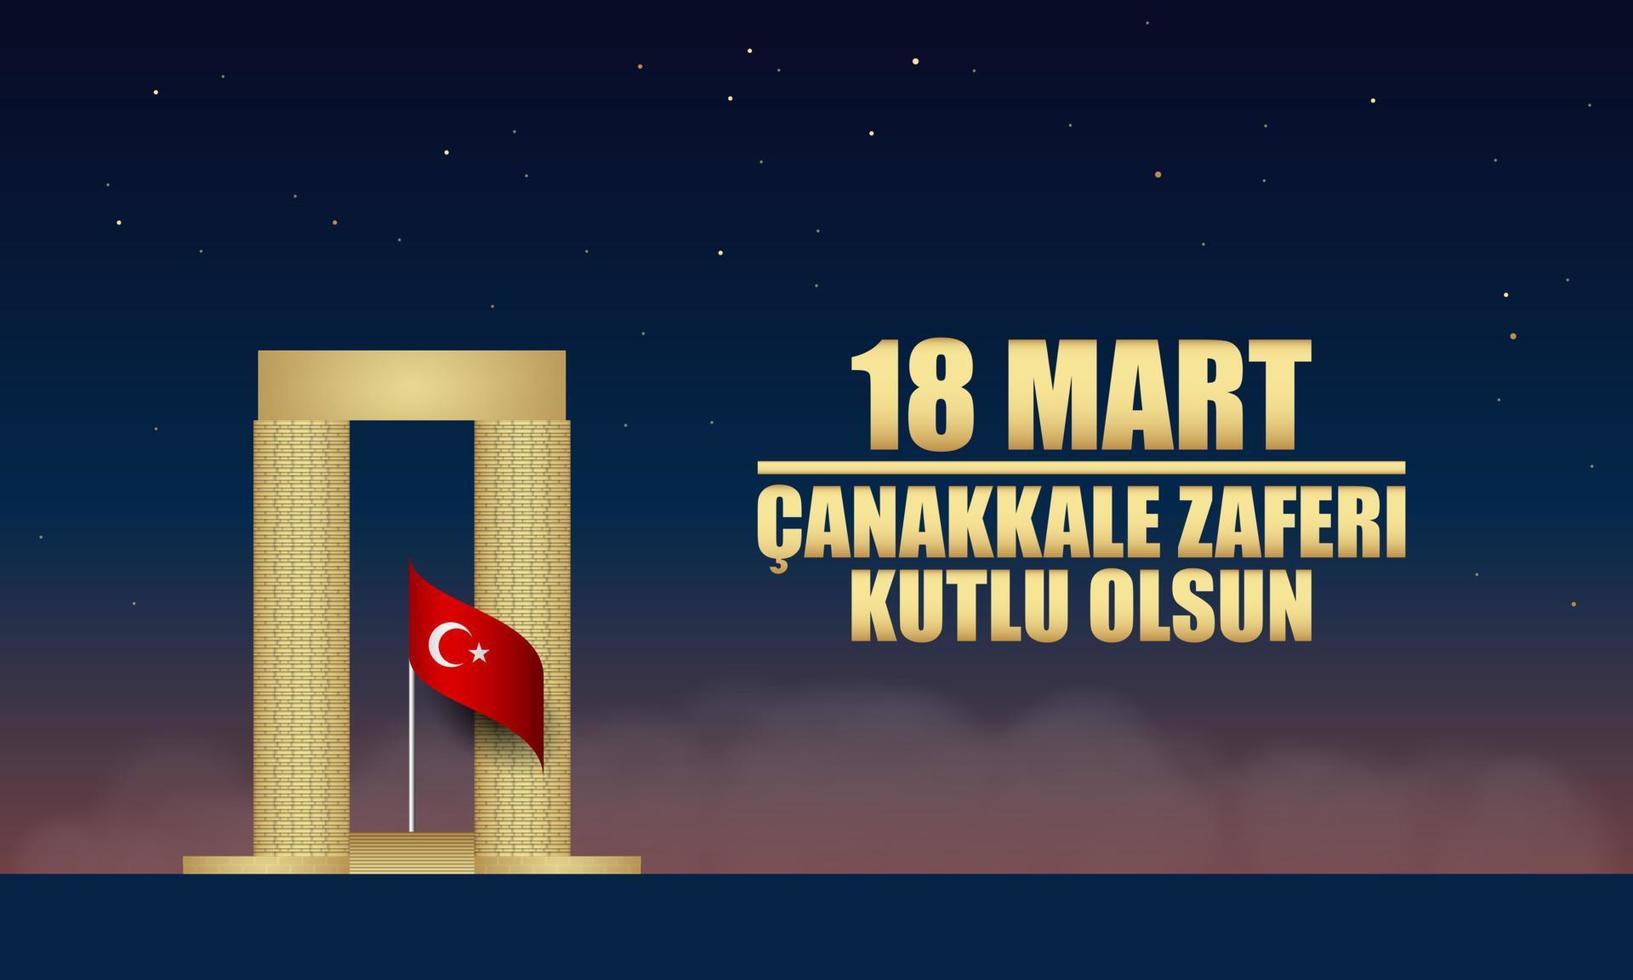 Canakkale Victory Day Background Design. Vector Illustration.